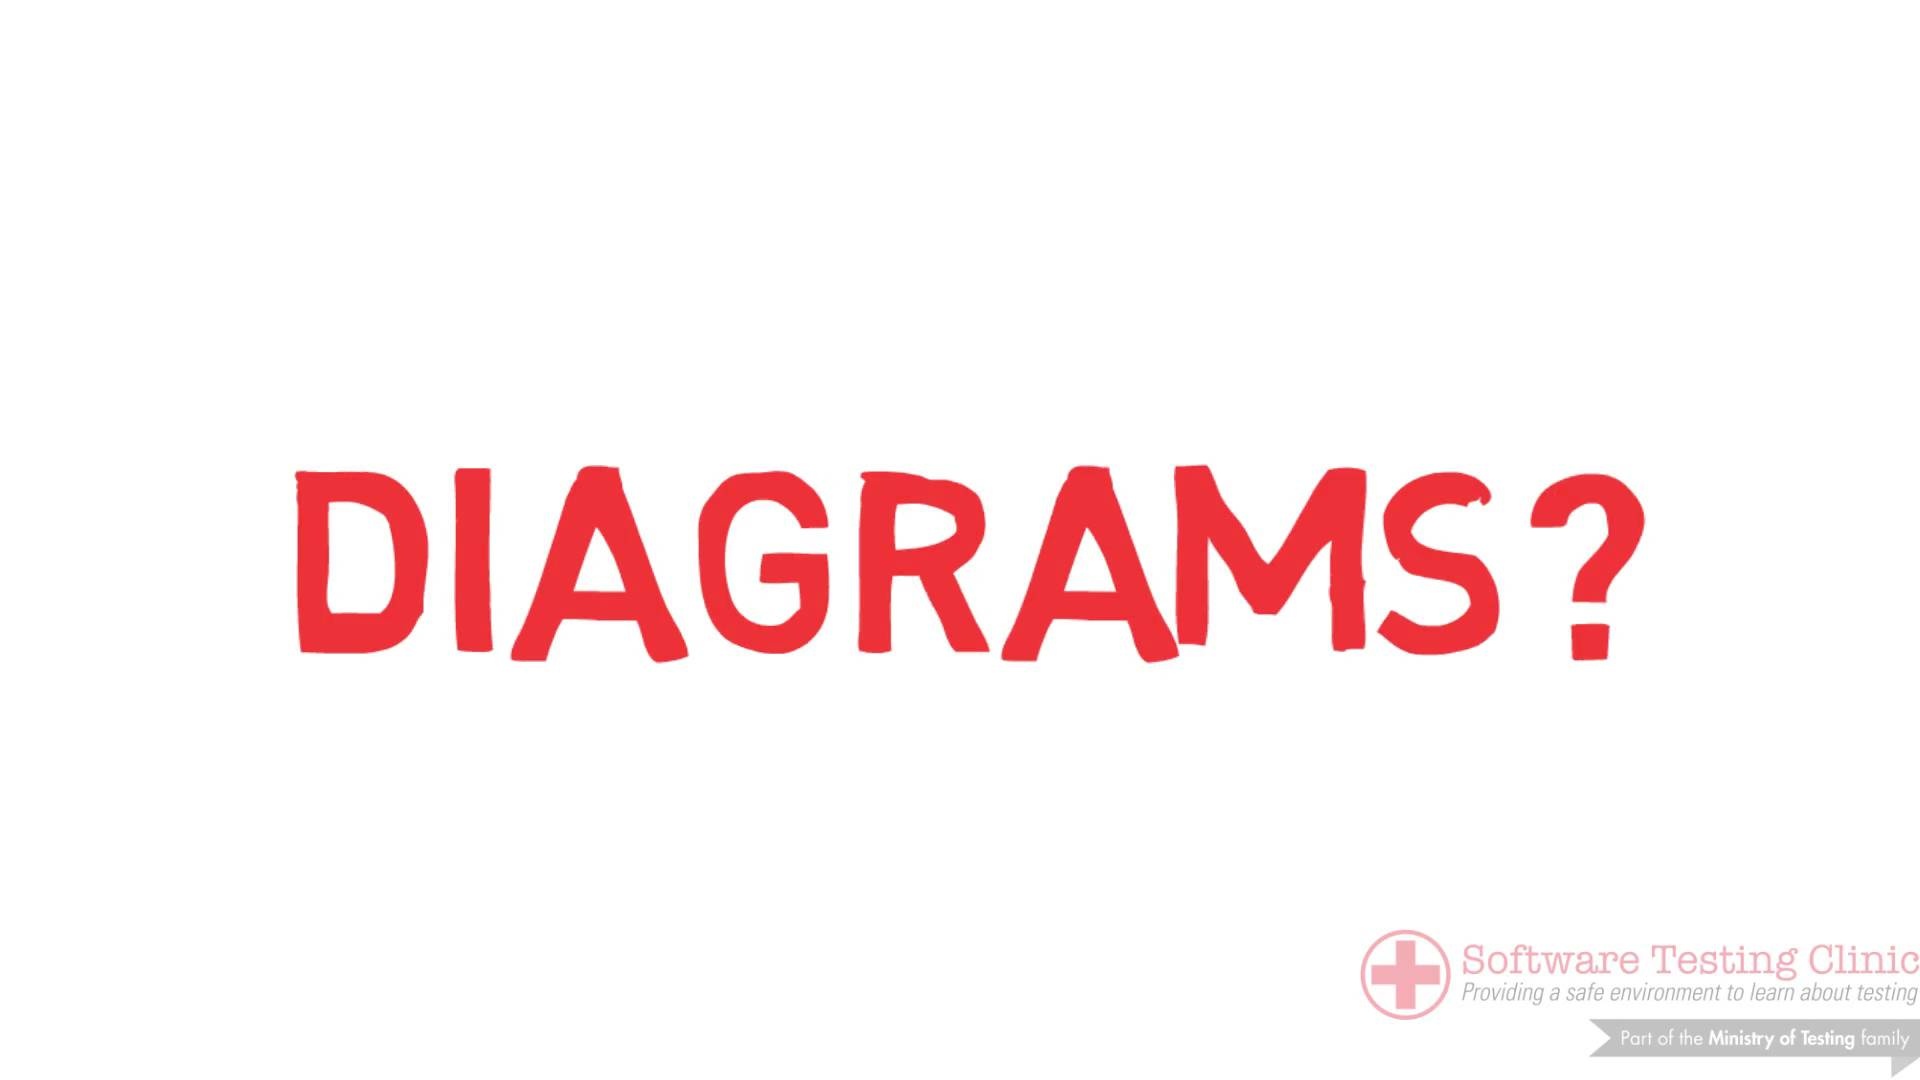 What Are Diagrams?